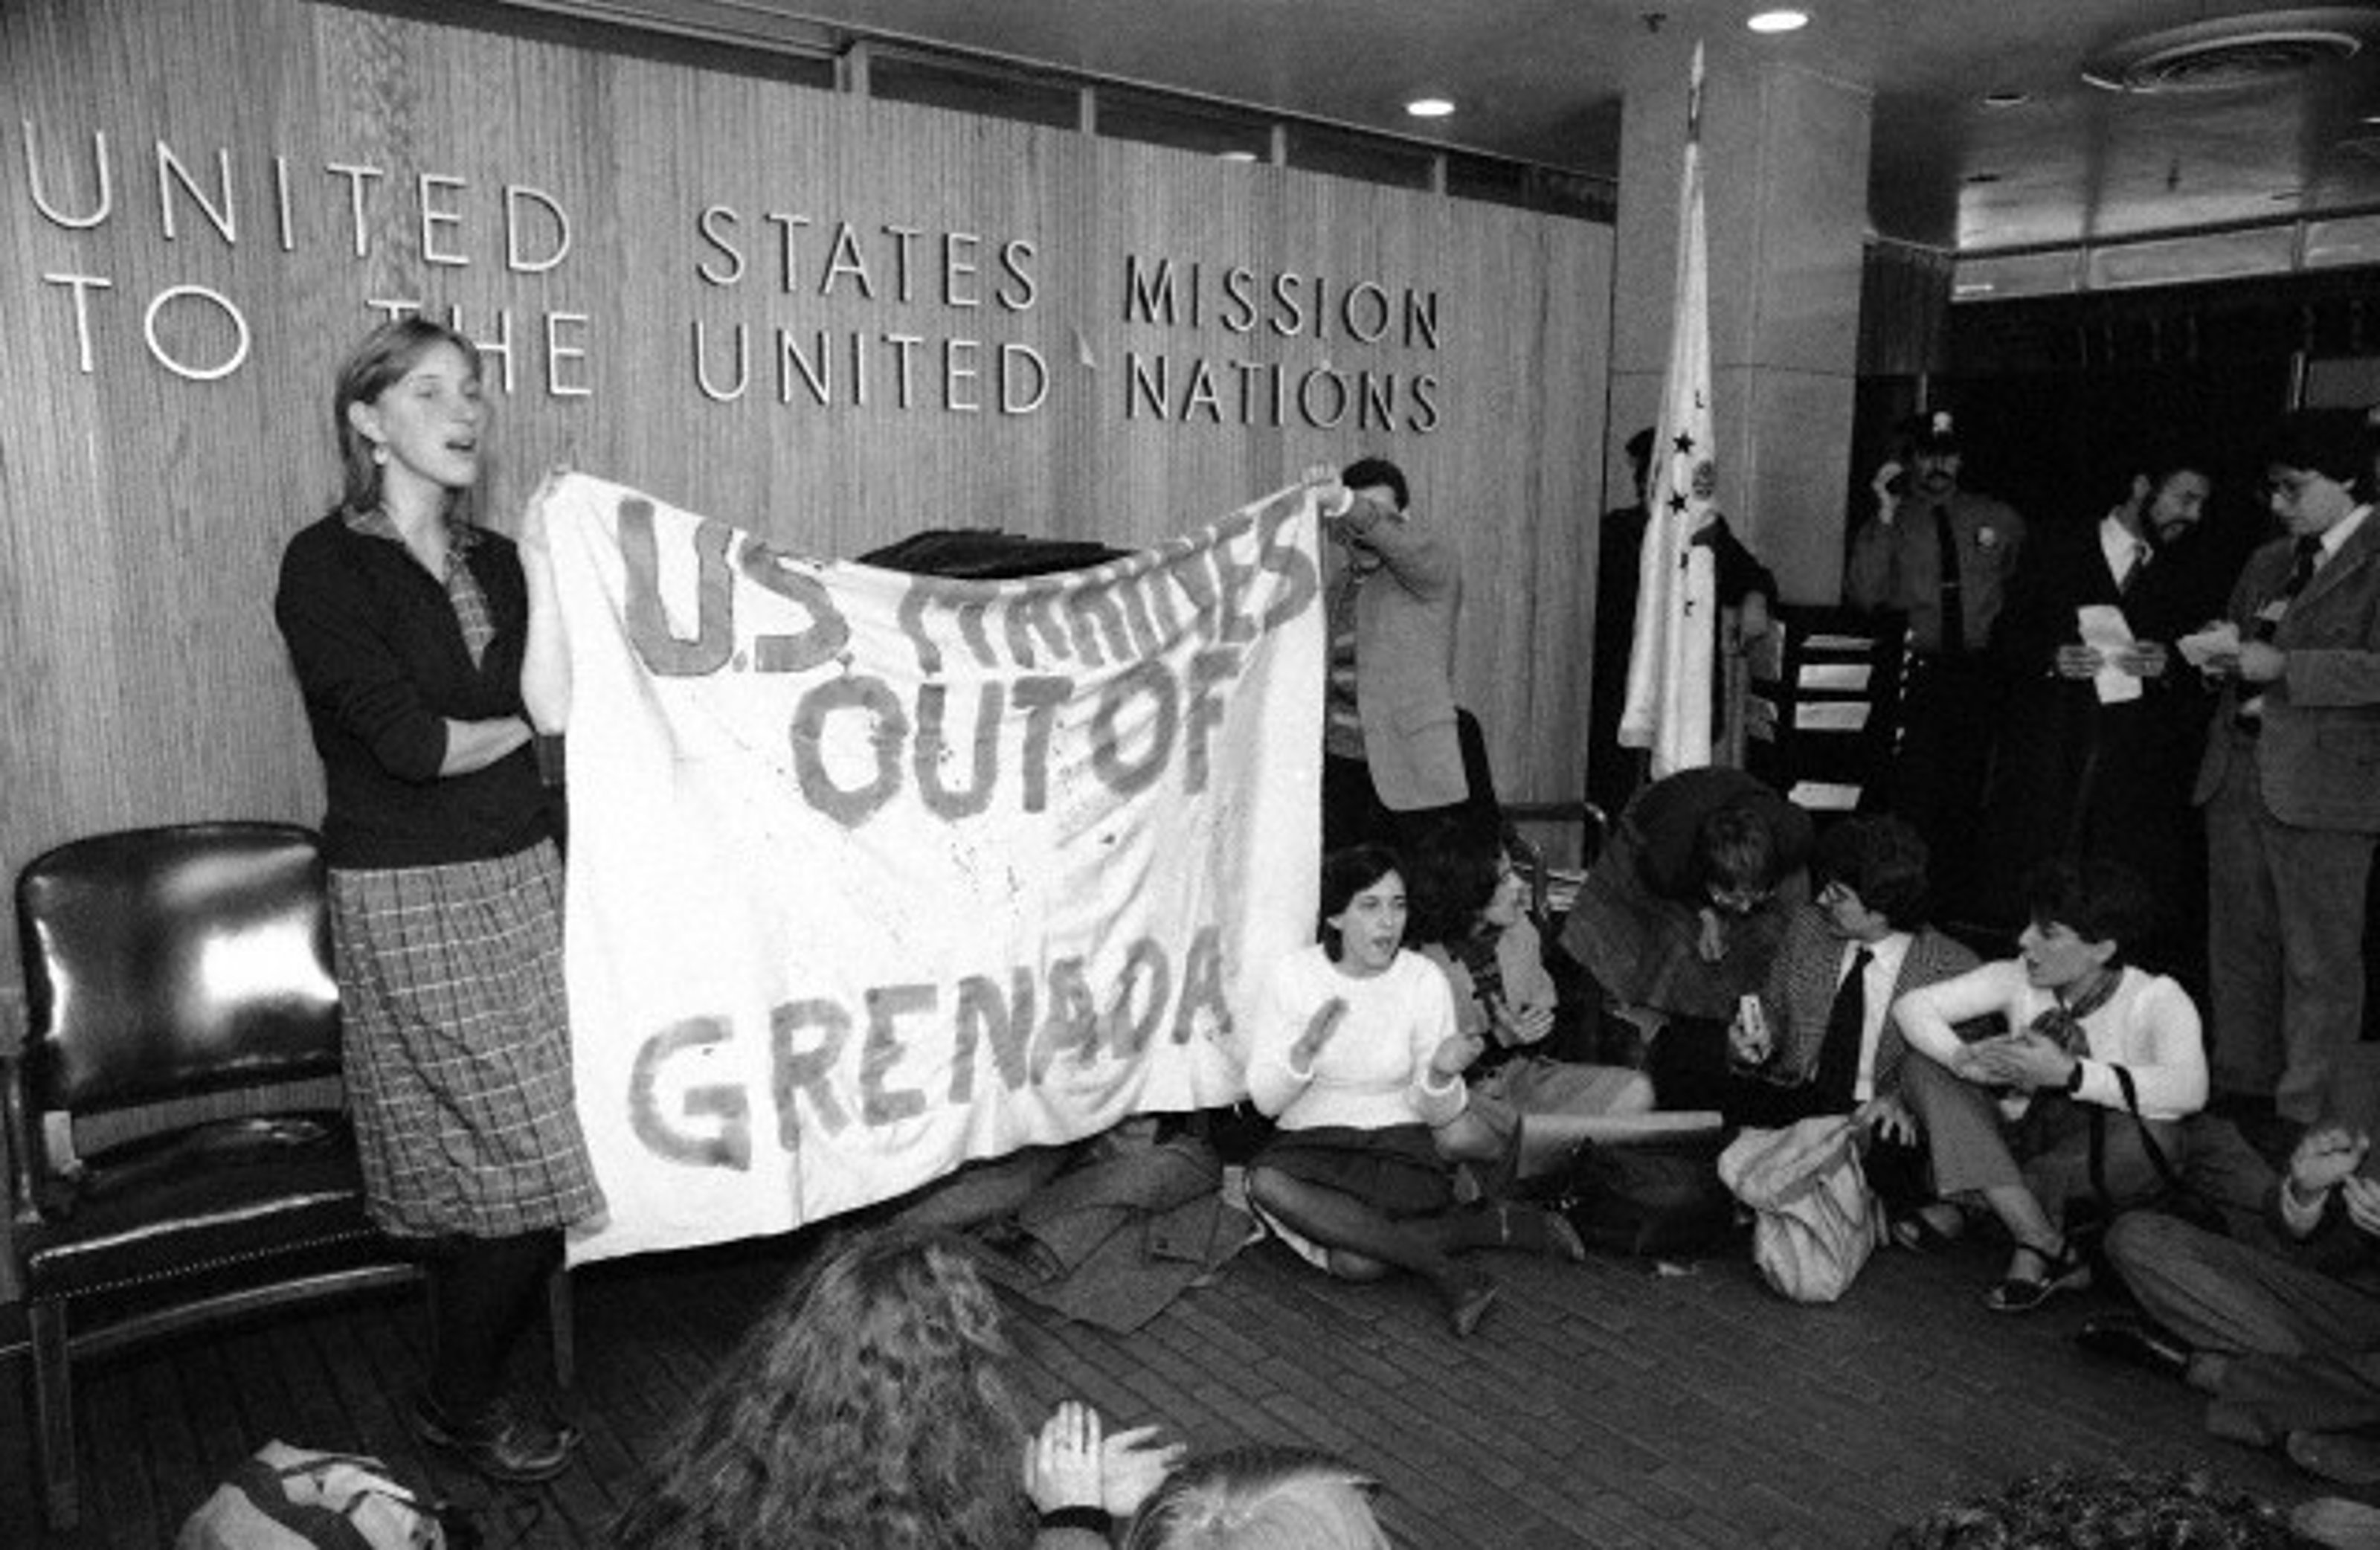 A group of 15 demonstrators staged a sit-in at the lobby of the United States Mission to the United Nations in New York on Thursday, Oct. 27, 1983, opposing the U.S. presence in Grenada.